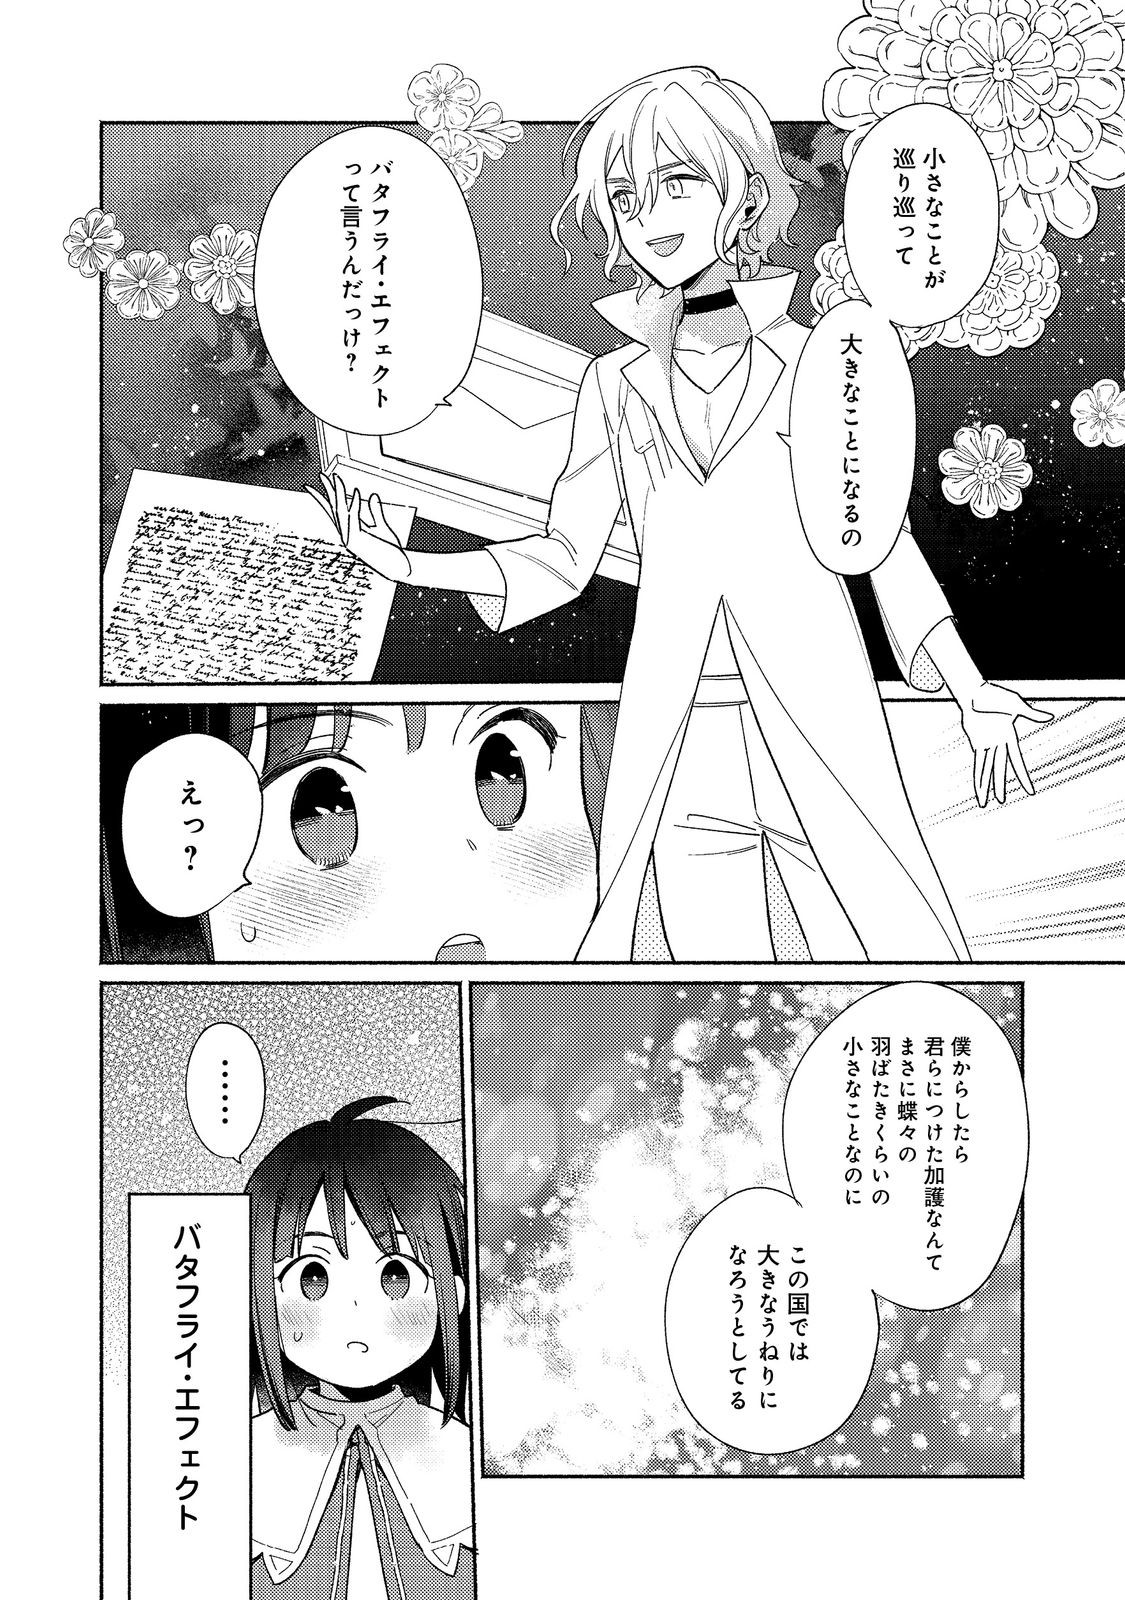 I’m the White Pig Nobleman 第19.2話 - Page 12